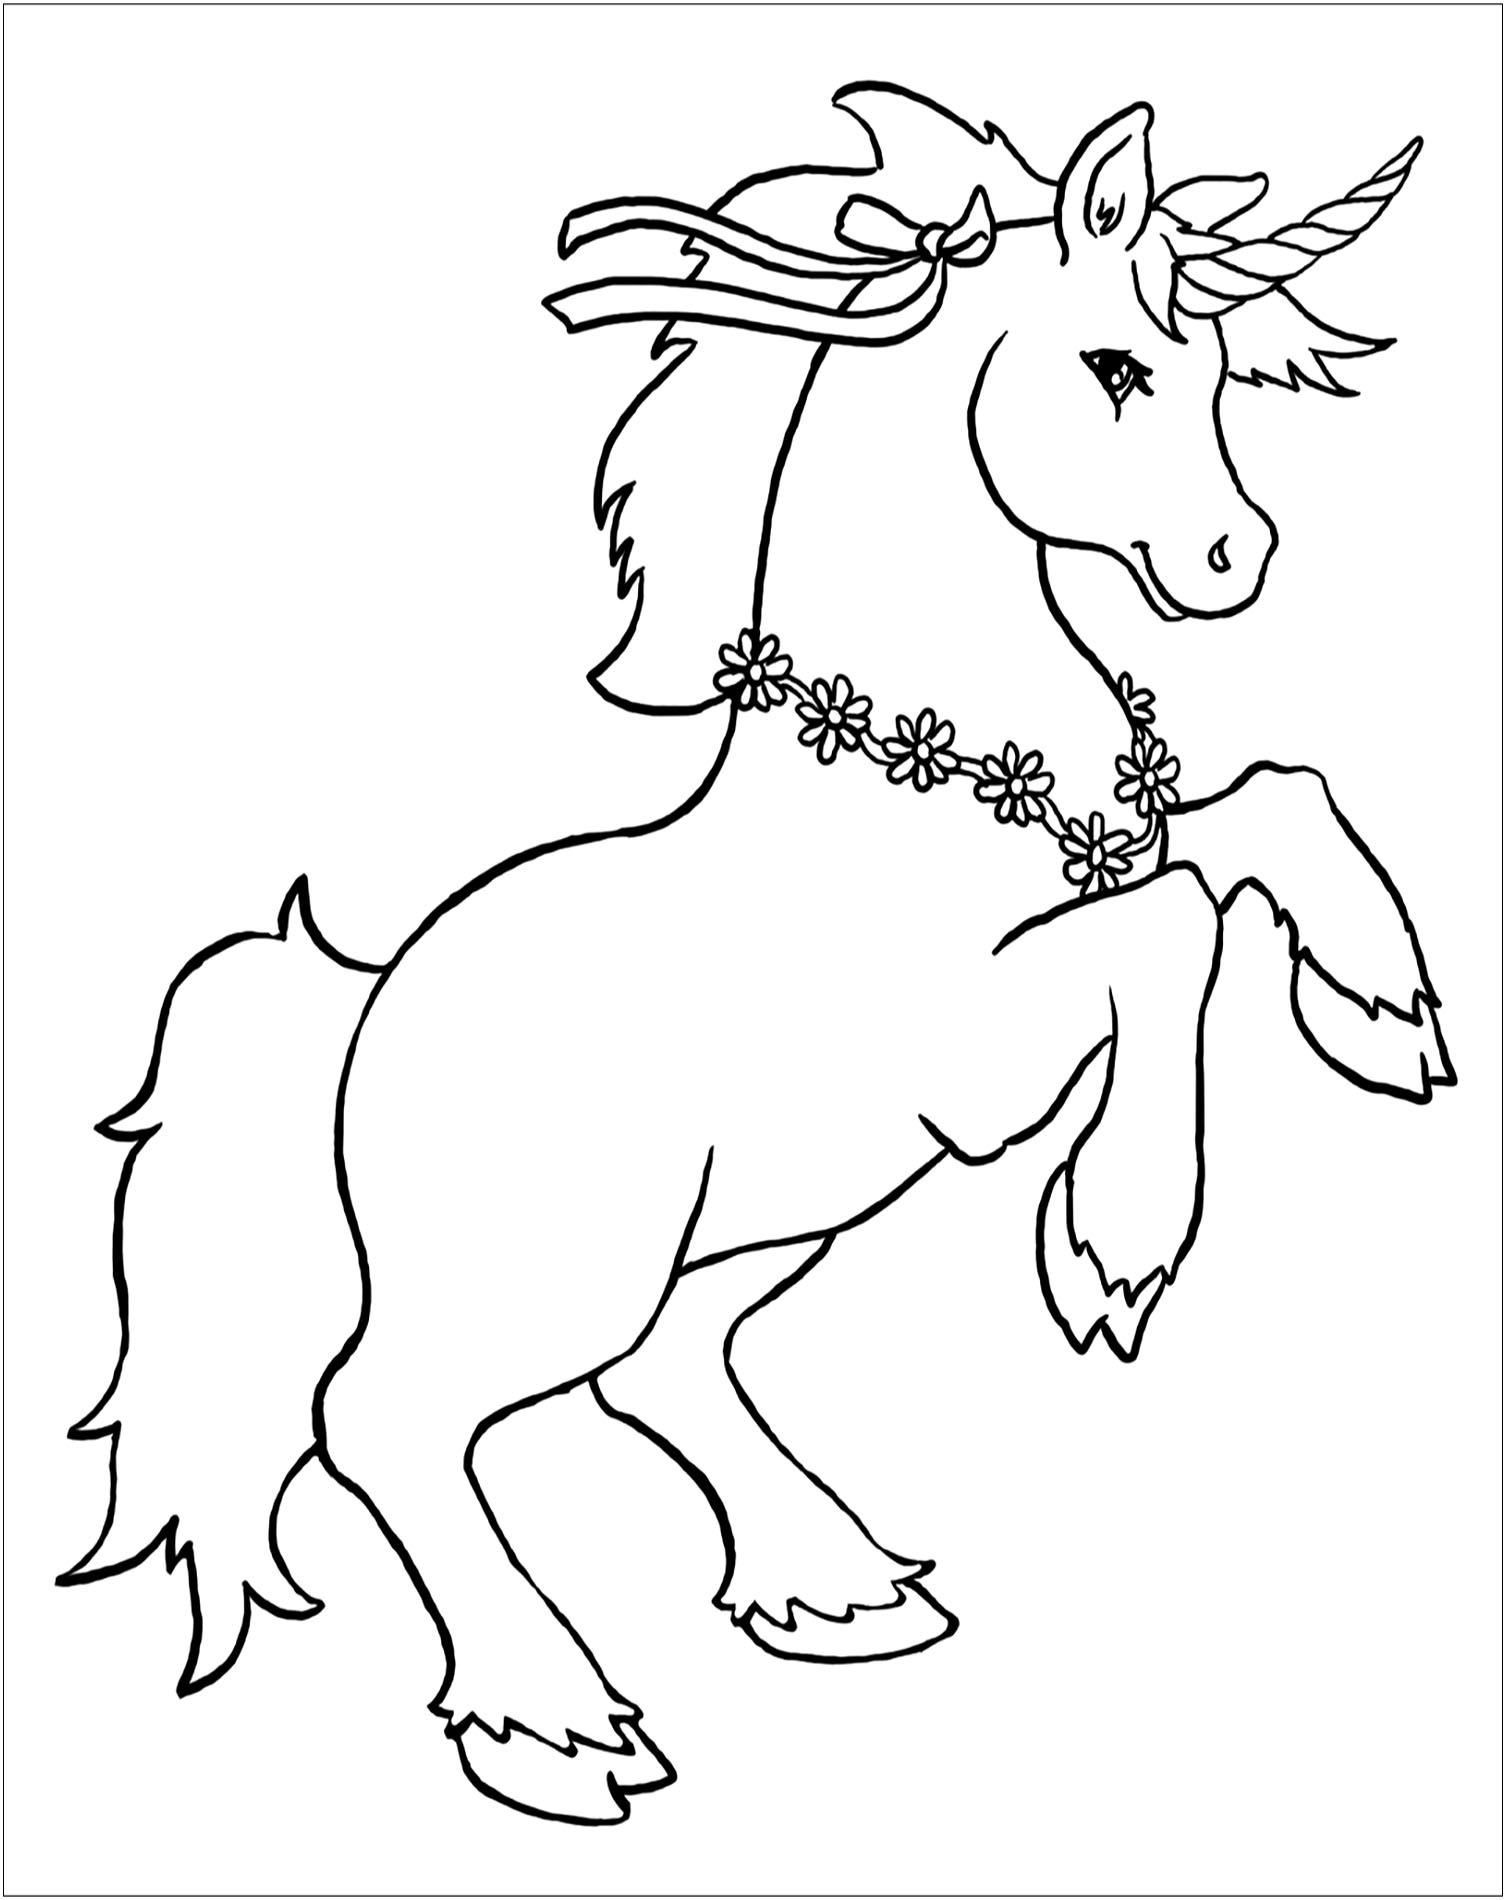 Download Unicorns to download - Unicorns Kids Coloring Pages